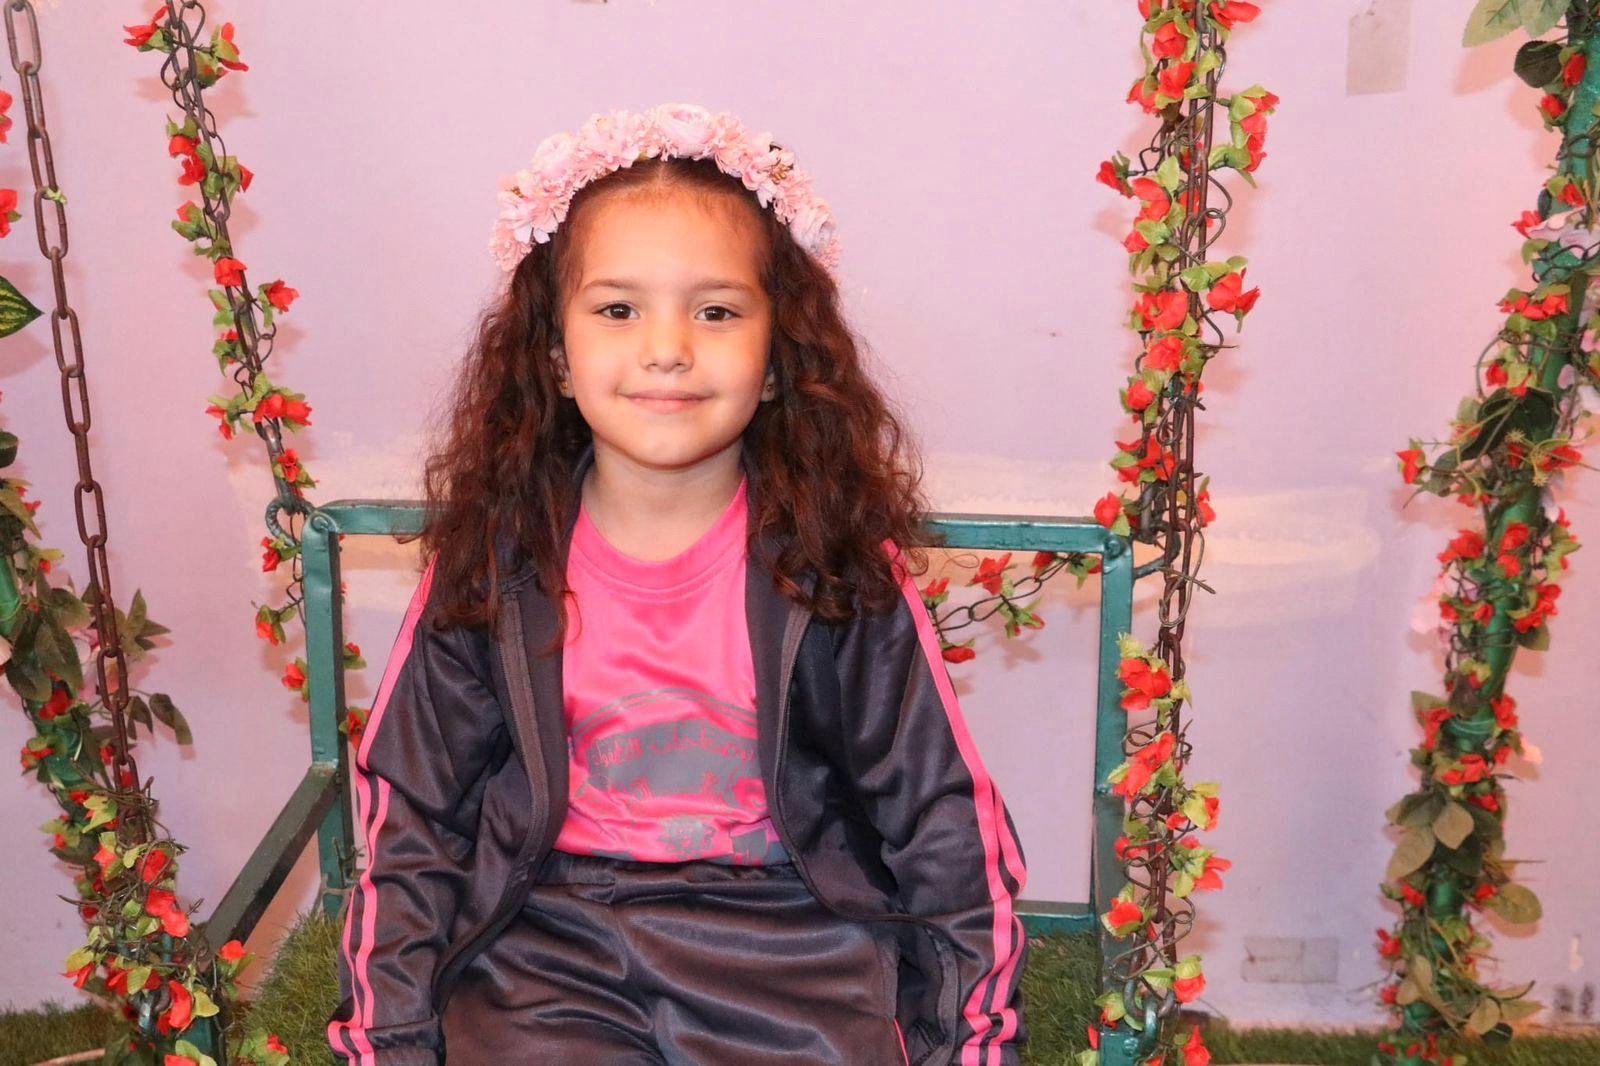 Six-year-old Hind Rajab Found Dead in Gaza City: Ambulance Workers Killed in Effort to Save Her